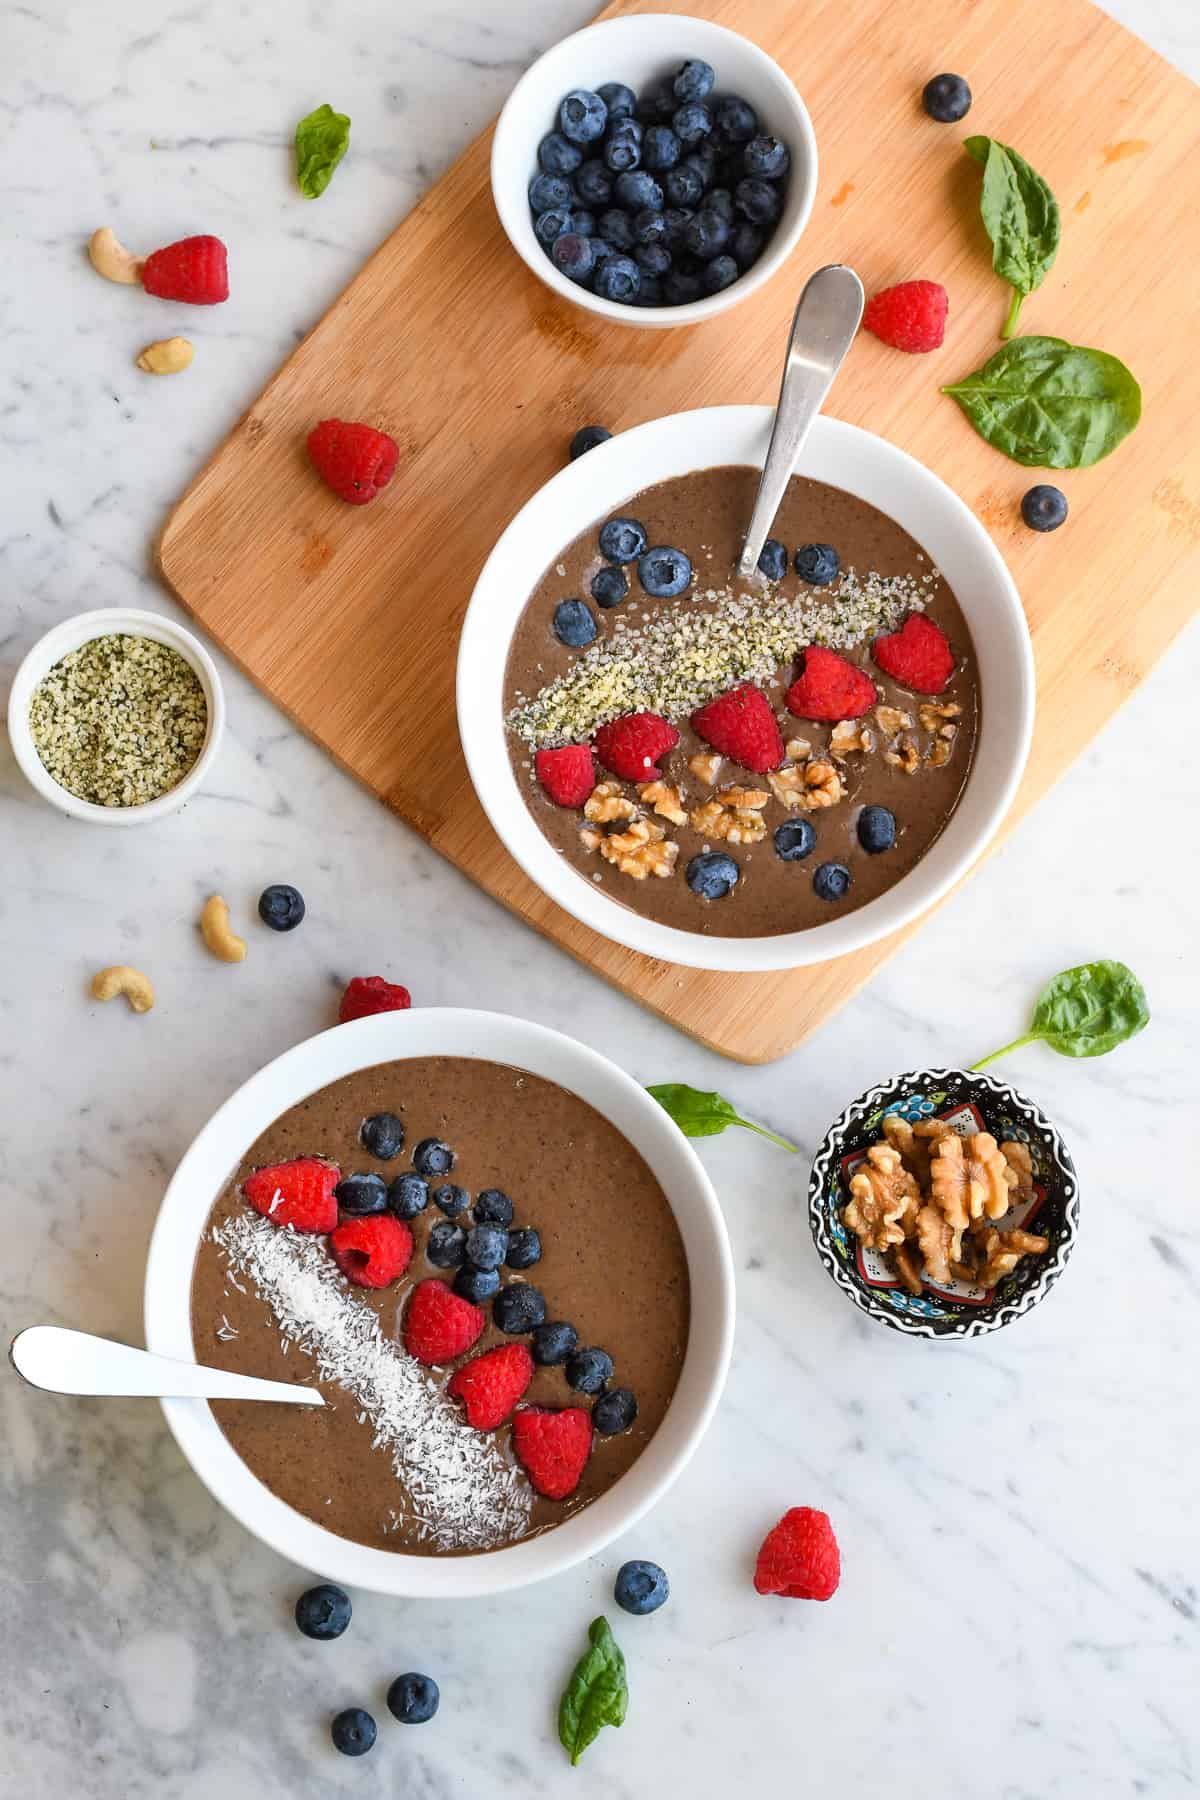 Chocolate Protein Smoothie Bowl 2 bowls on board with toppings